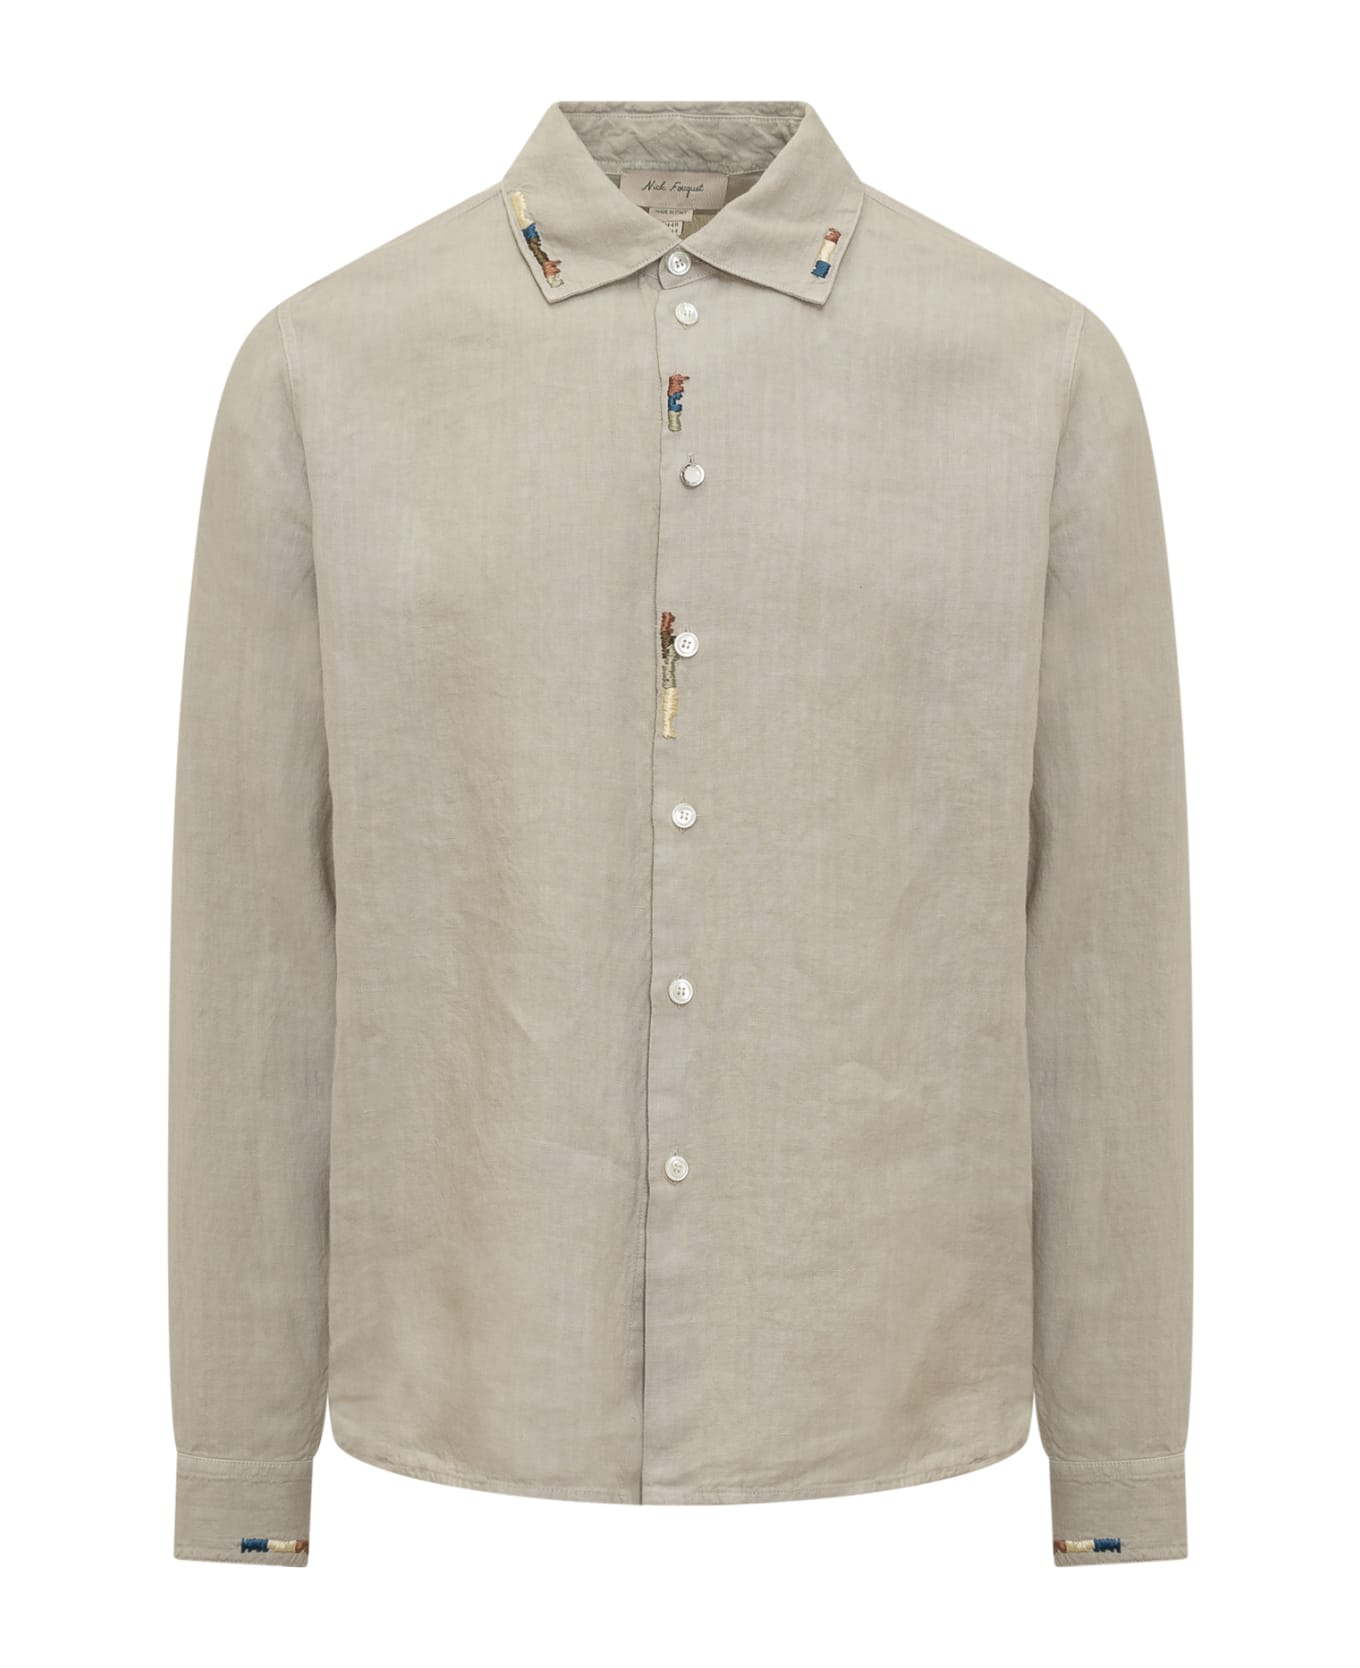 Nick Fouquet Shirt With Embroidery - LIGHT BEIGE